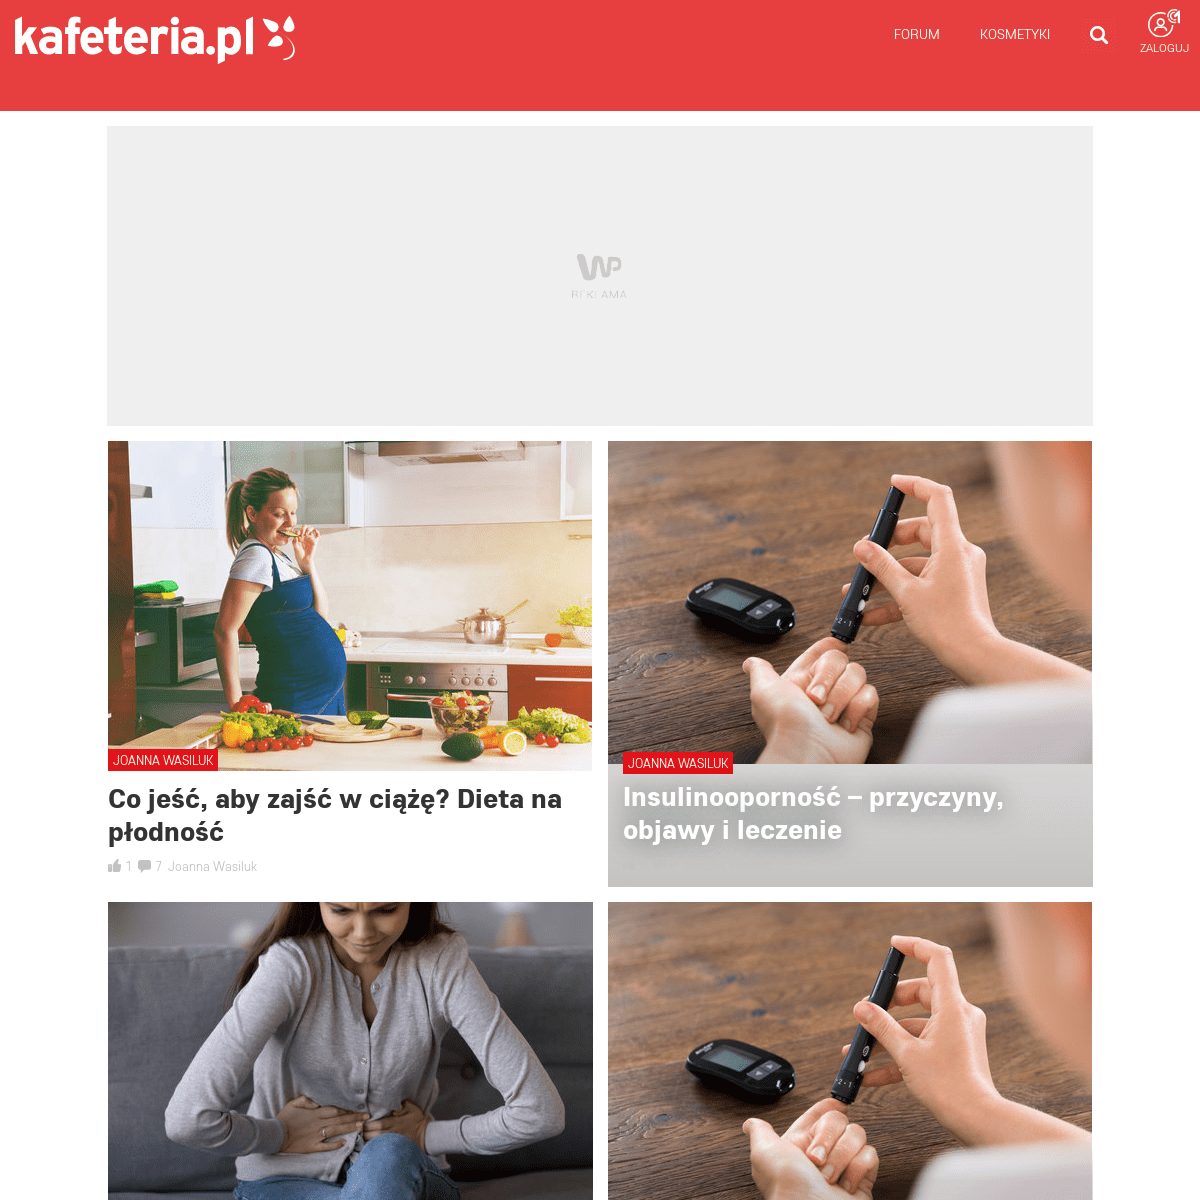 A complete backup of https://kafeteria.pl